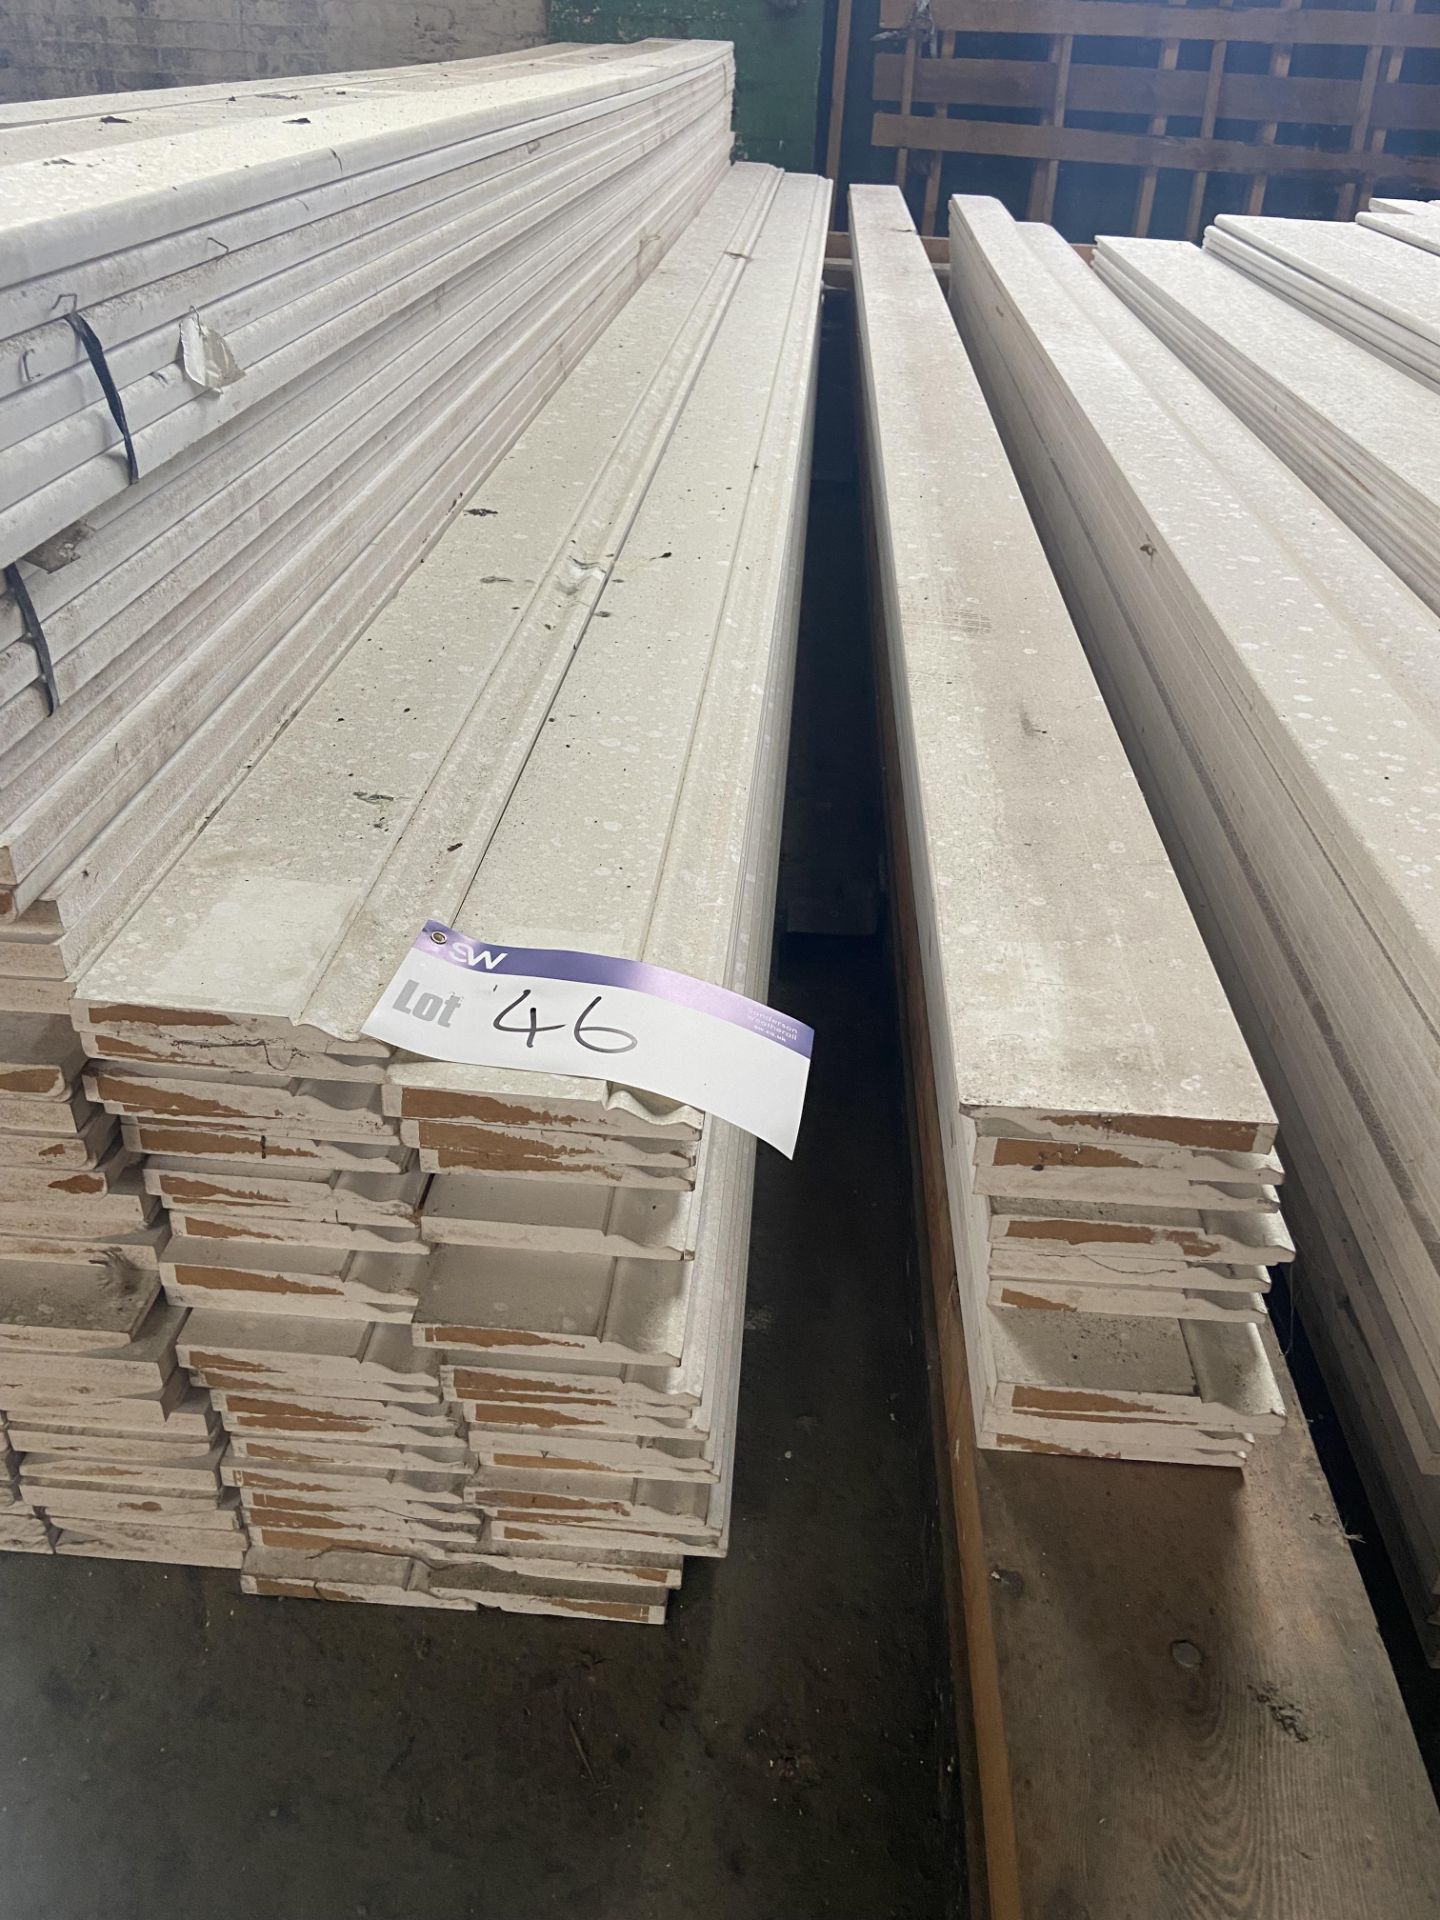 Approx. 61 Lengths of MDF Primed Ovlo Skirting Boards, each approx. 145mm x 18mm x 4.4m long, as set